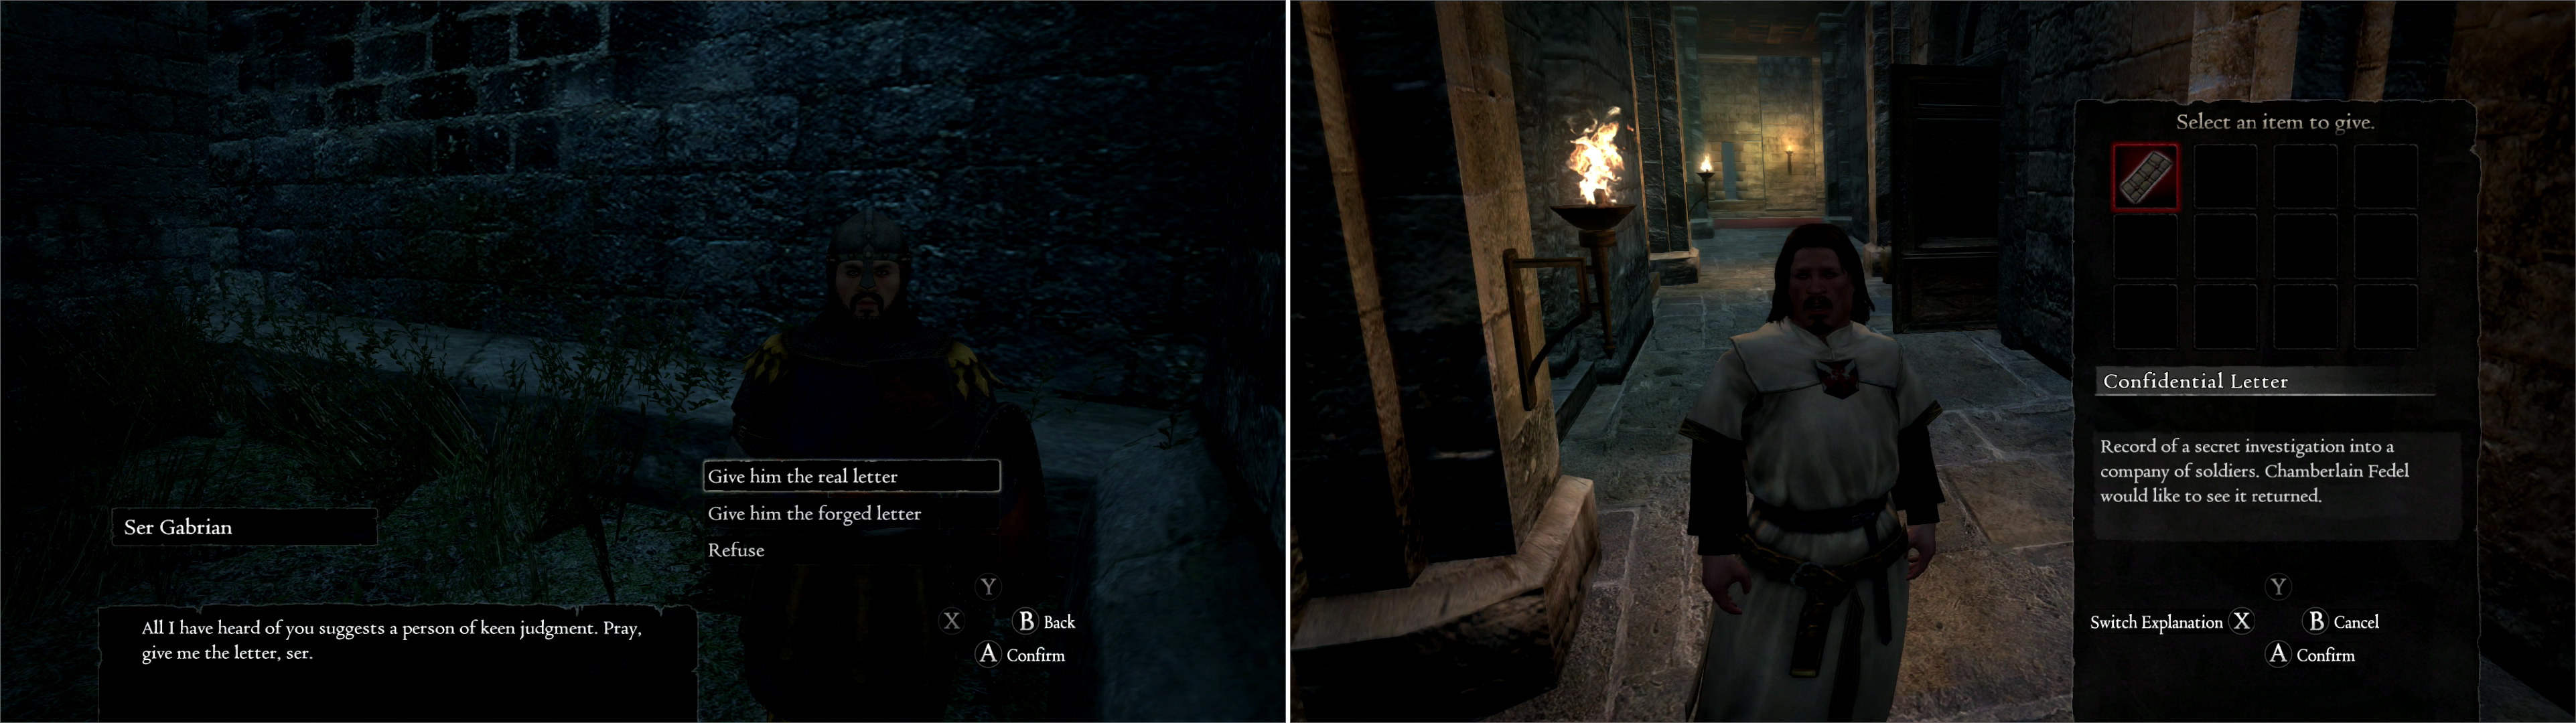 With the Confidential Letter (and perhaps its forgery) in hand, return to the castle, where you can give the letter to either Ser Gabrian (left) Fedel (right) or both.